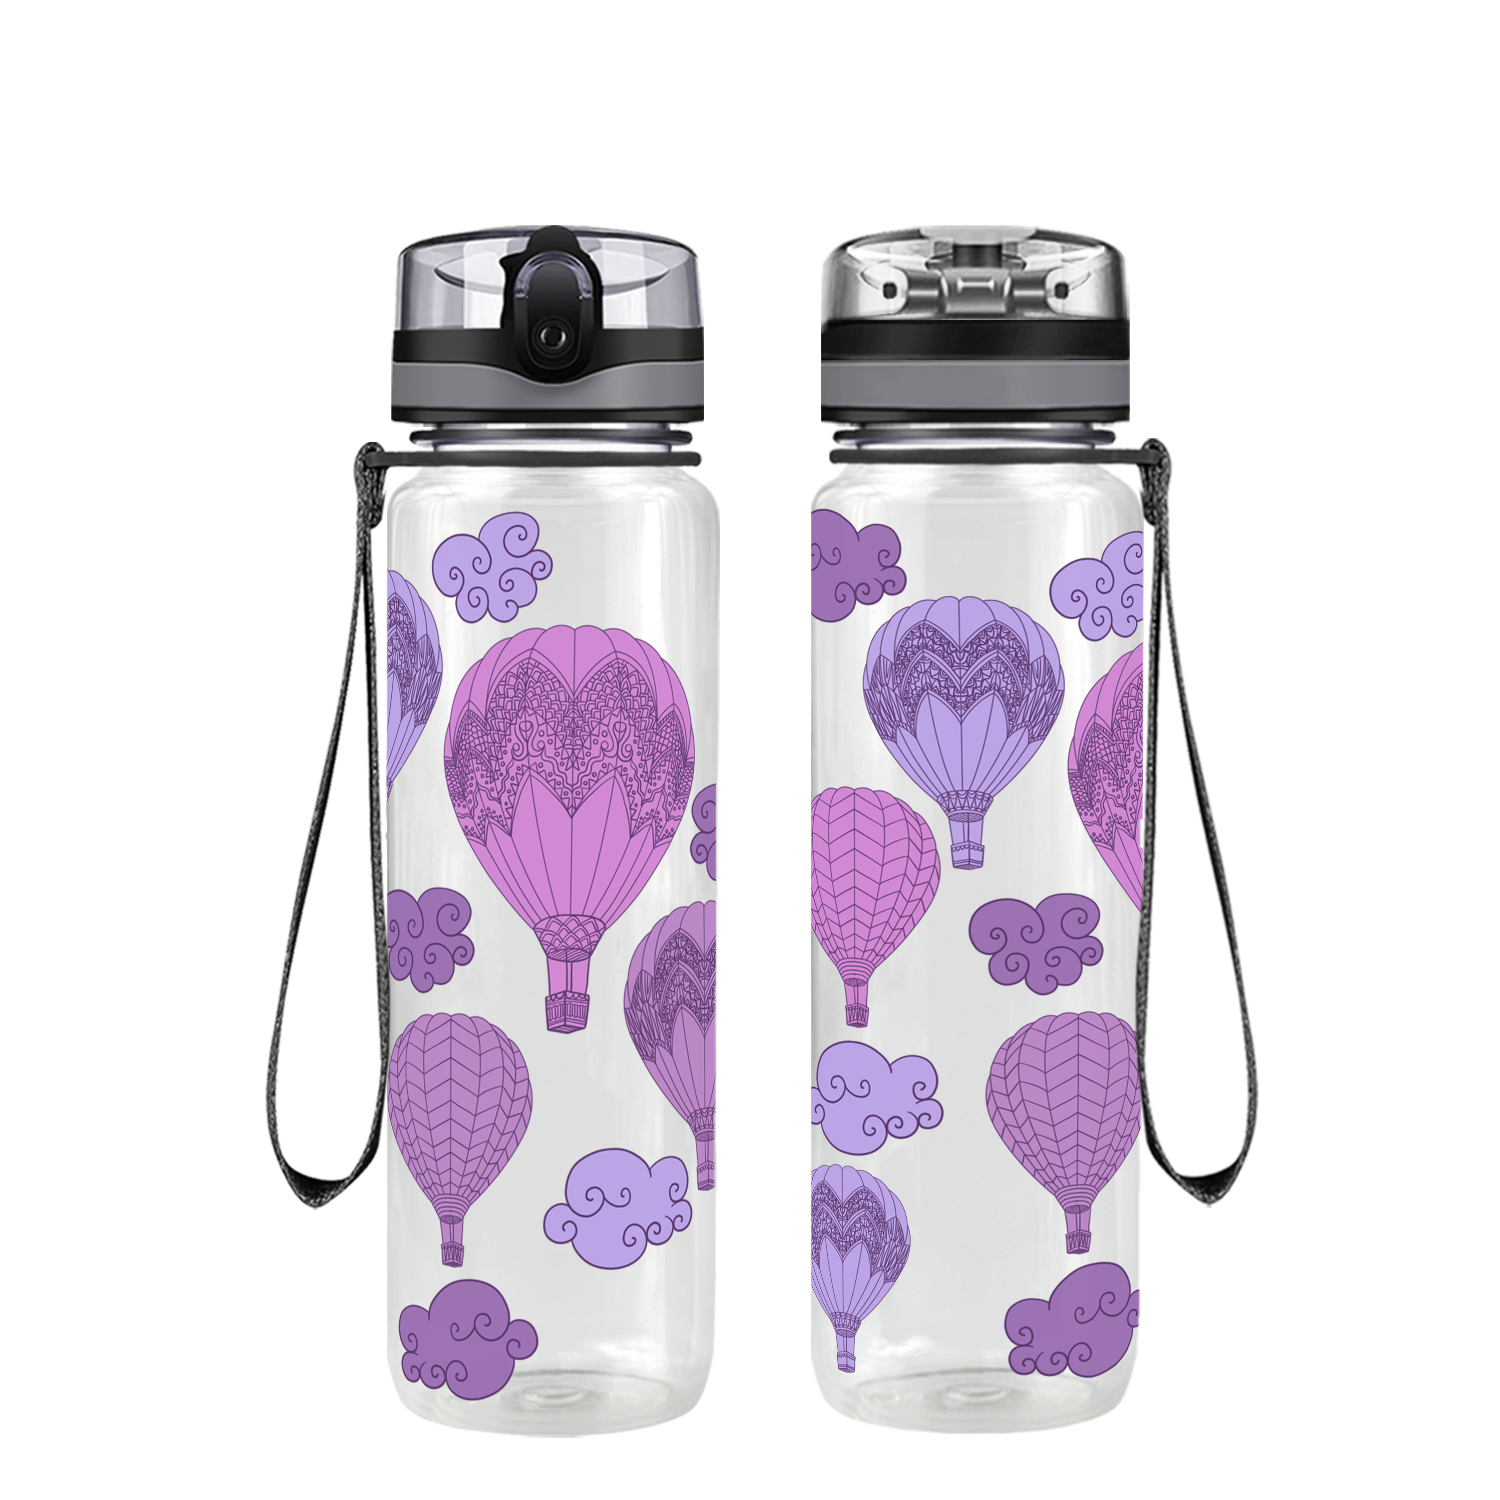 Dogs on 20 oz Motivational Tracking Water Bottle